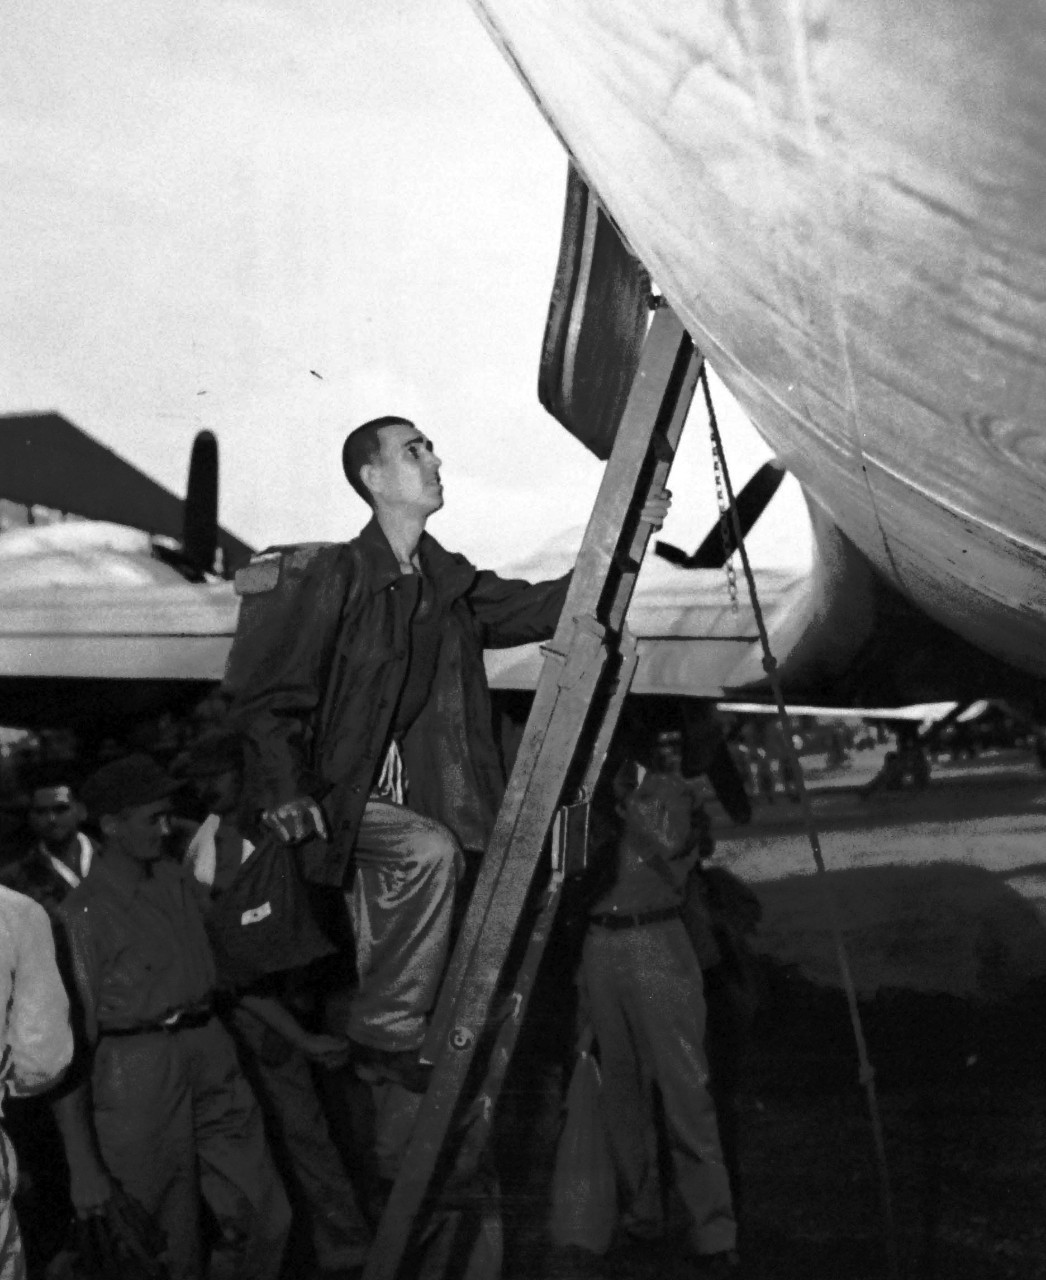 80-G-495641:  Prisoner of War Camp, Japan, 1945.    Former Prisoners of War preparing to leave Yokosuka, Japan, for the United States.  Prisoners of War aligning ladder to transport plane.   Photograph released September 19, 1945.  Official U.S. Navy photograph, now in the collections of the National Archives.  (2014/05/29).    The original is a small photograph.   